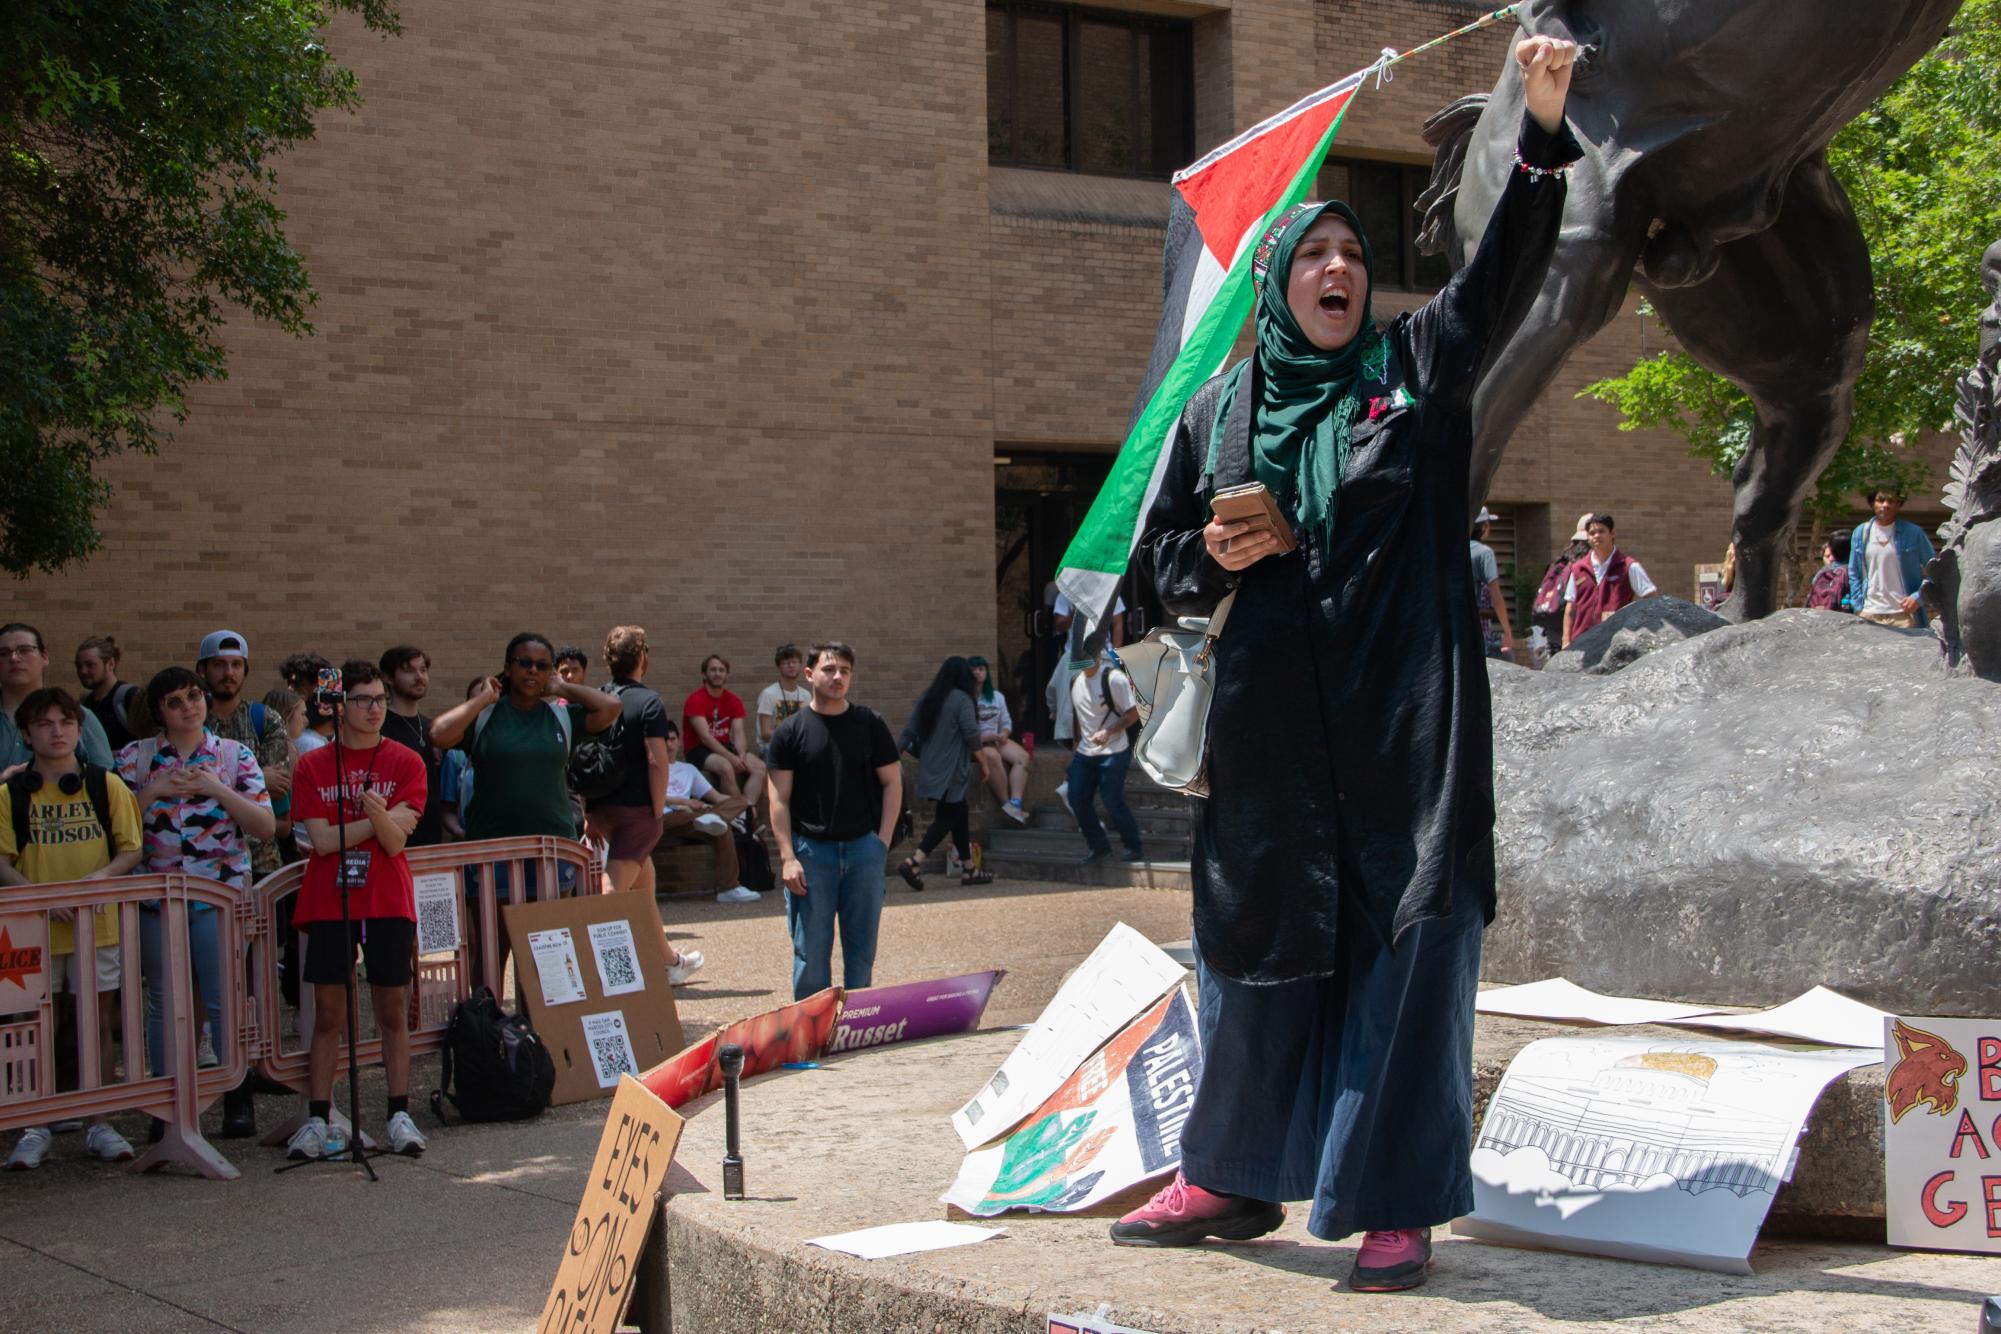 %28Photo+Gallery%29+Palestine+sit-in+organizers+gather+protestors+on+The+Quad